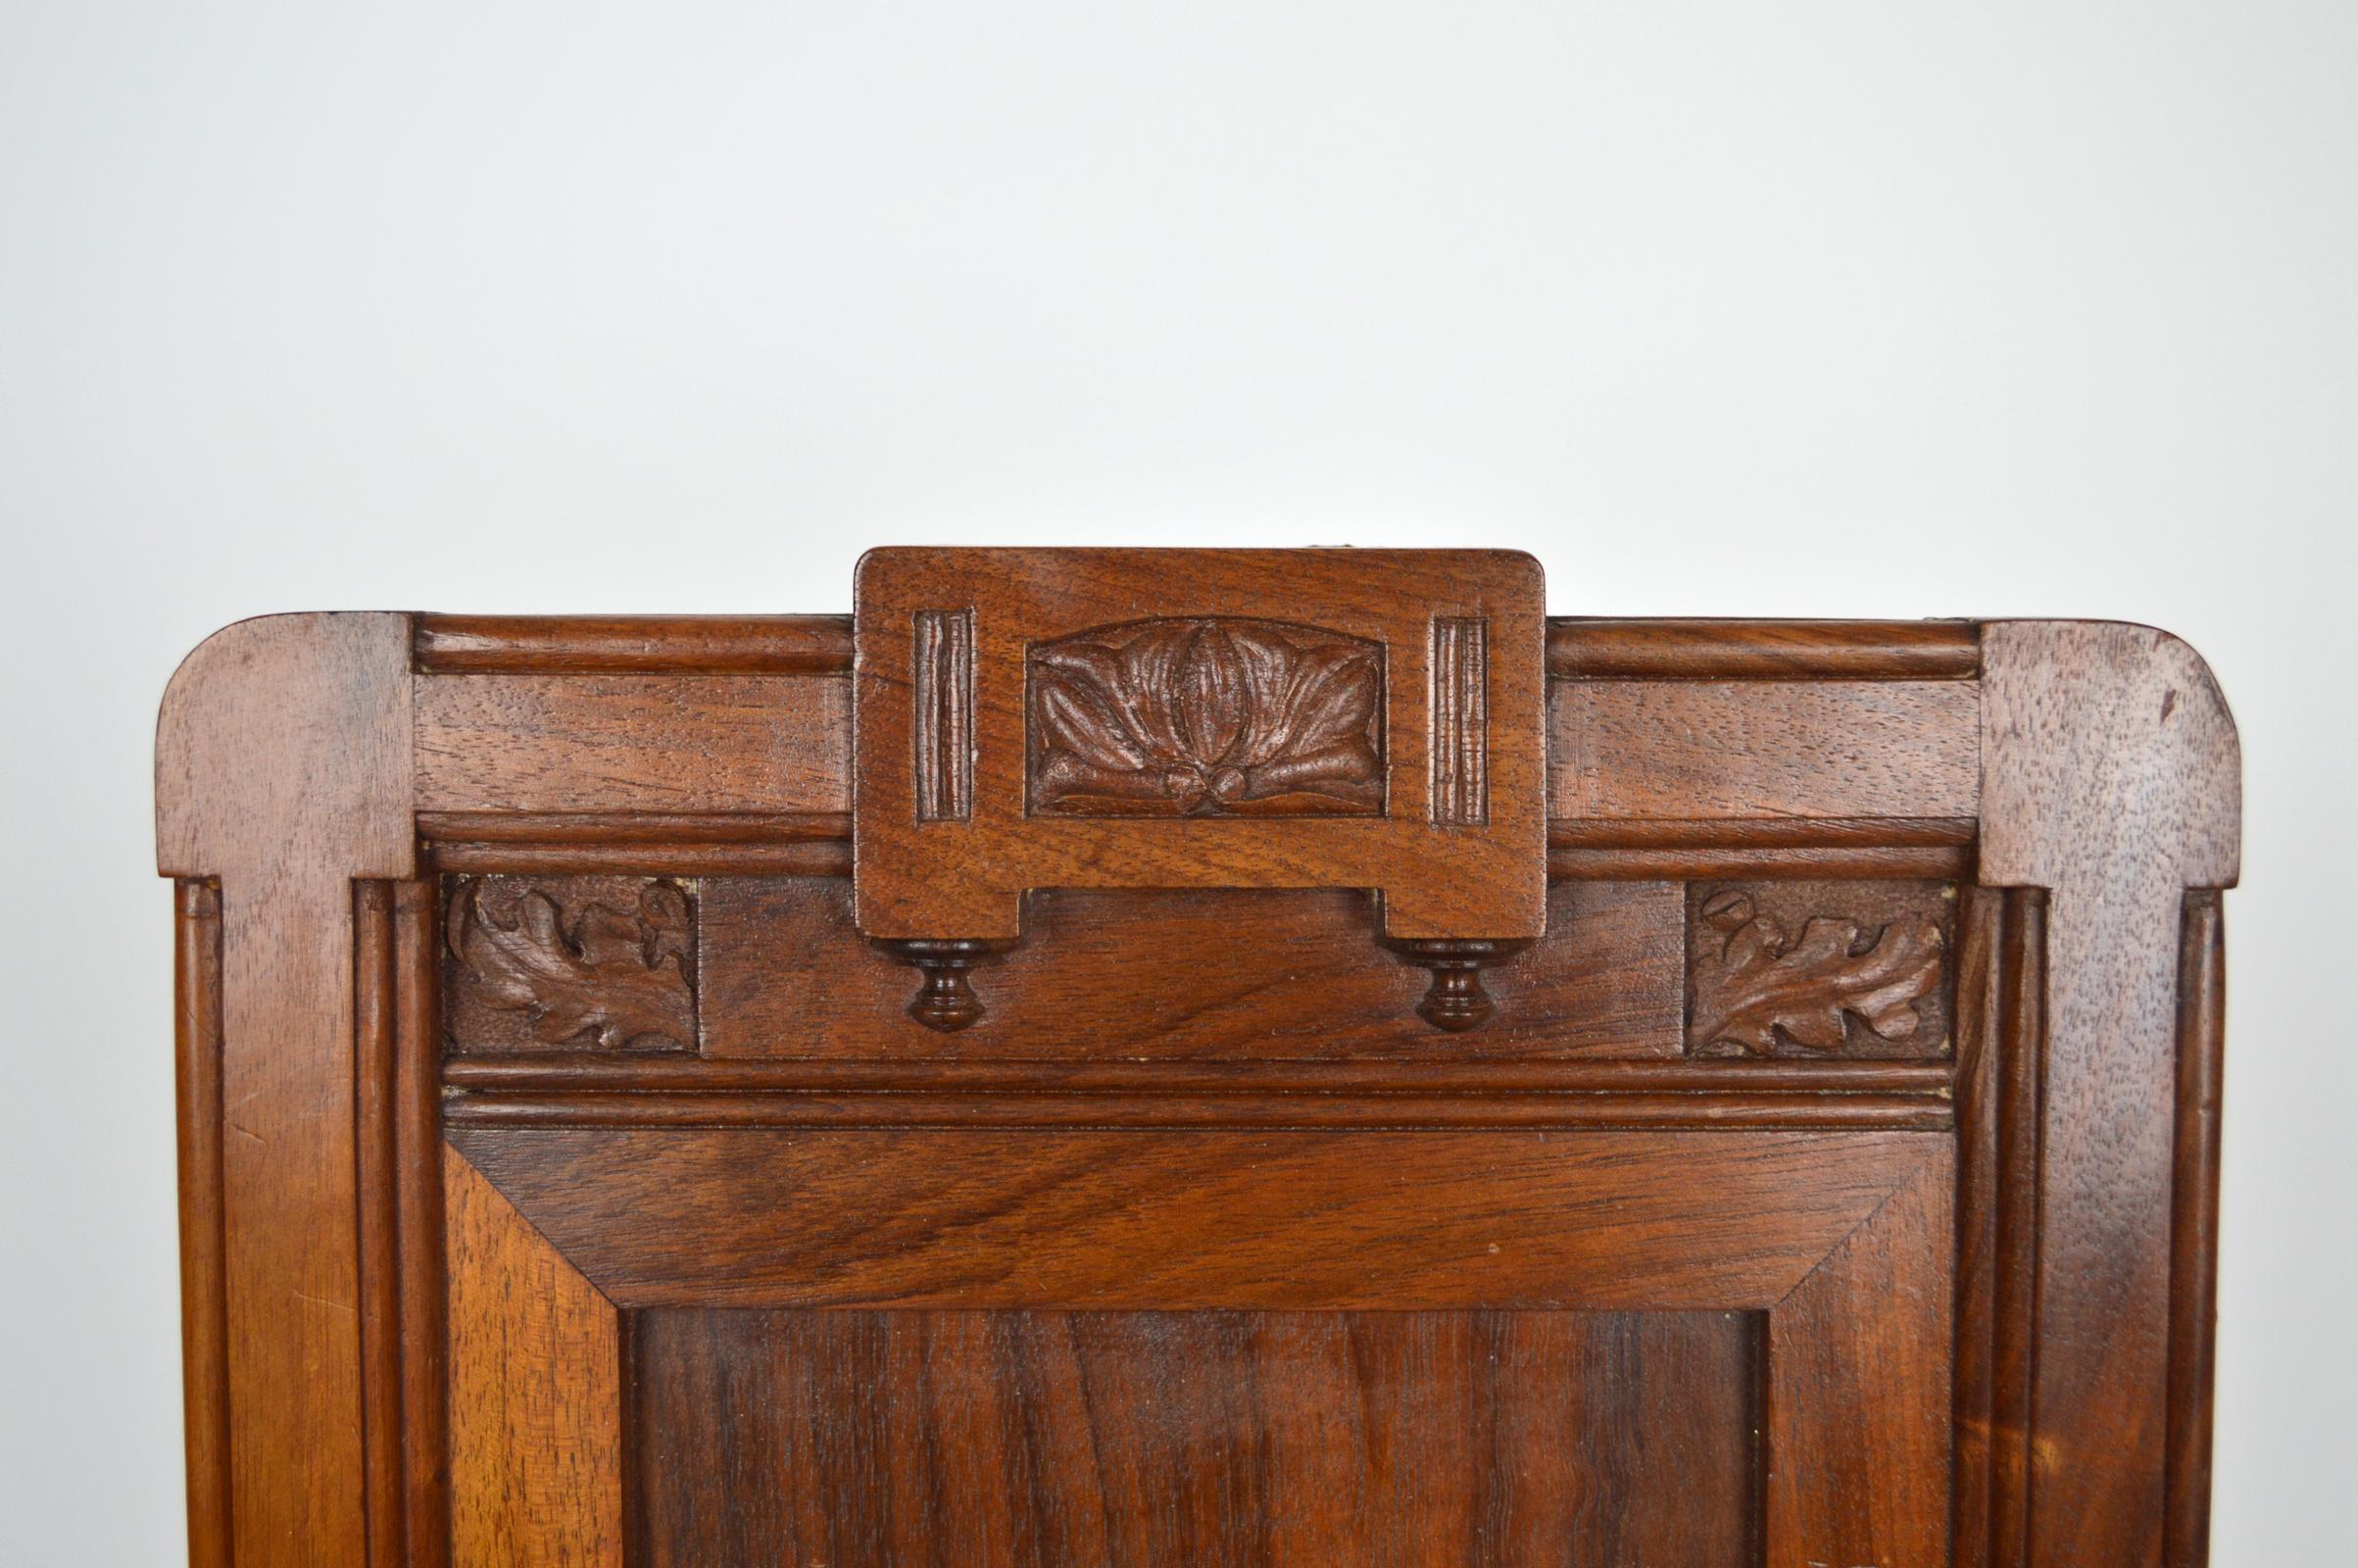 Early 20th Century Art Nouveau Carved Walnut Nightstand / Bedside Table with Marble Top, circa 1900 For Sale